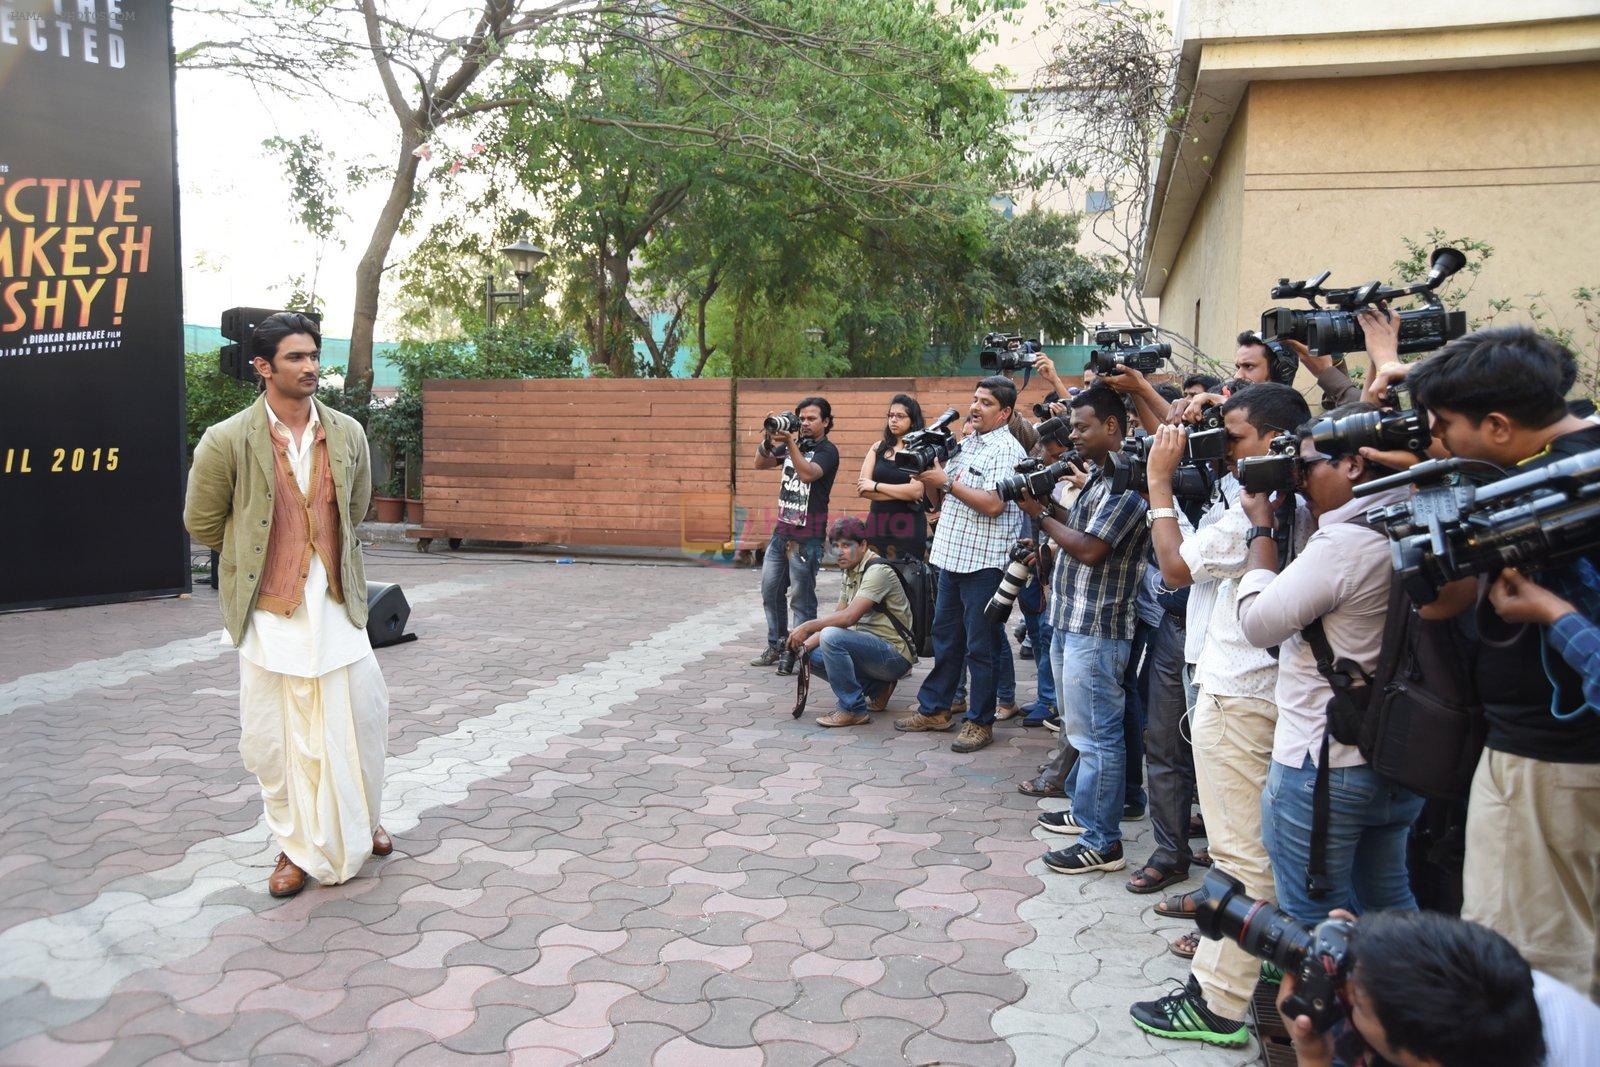 Sushant Singh Rajput at the Launch of Detective Byomkesh Bakshy 2nd Trailer on 9th March 2015